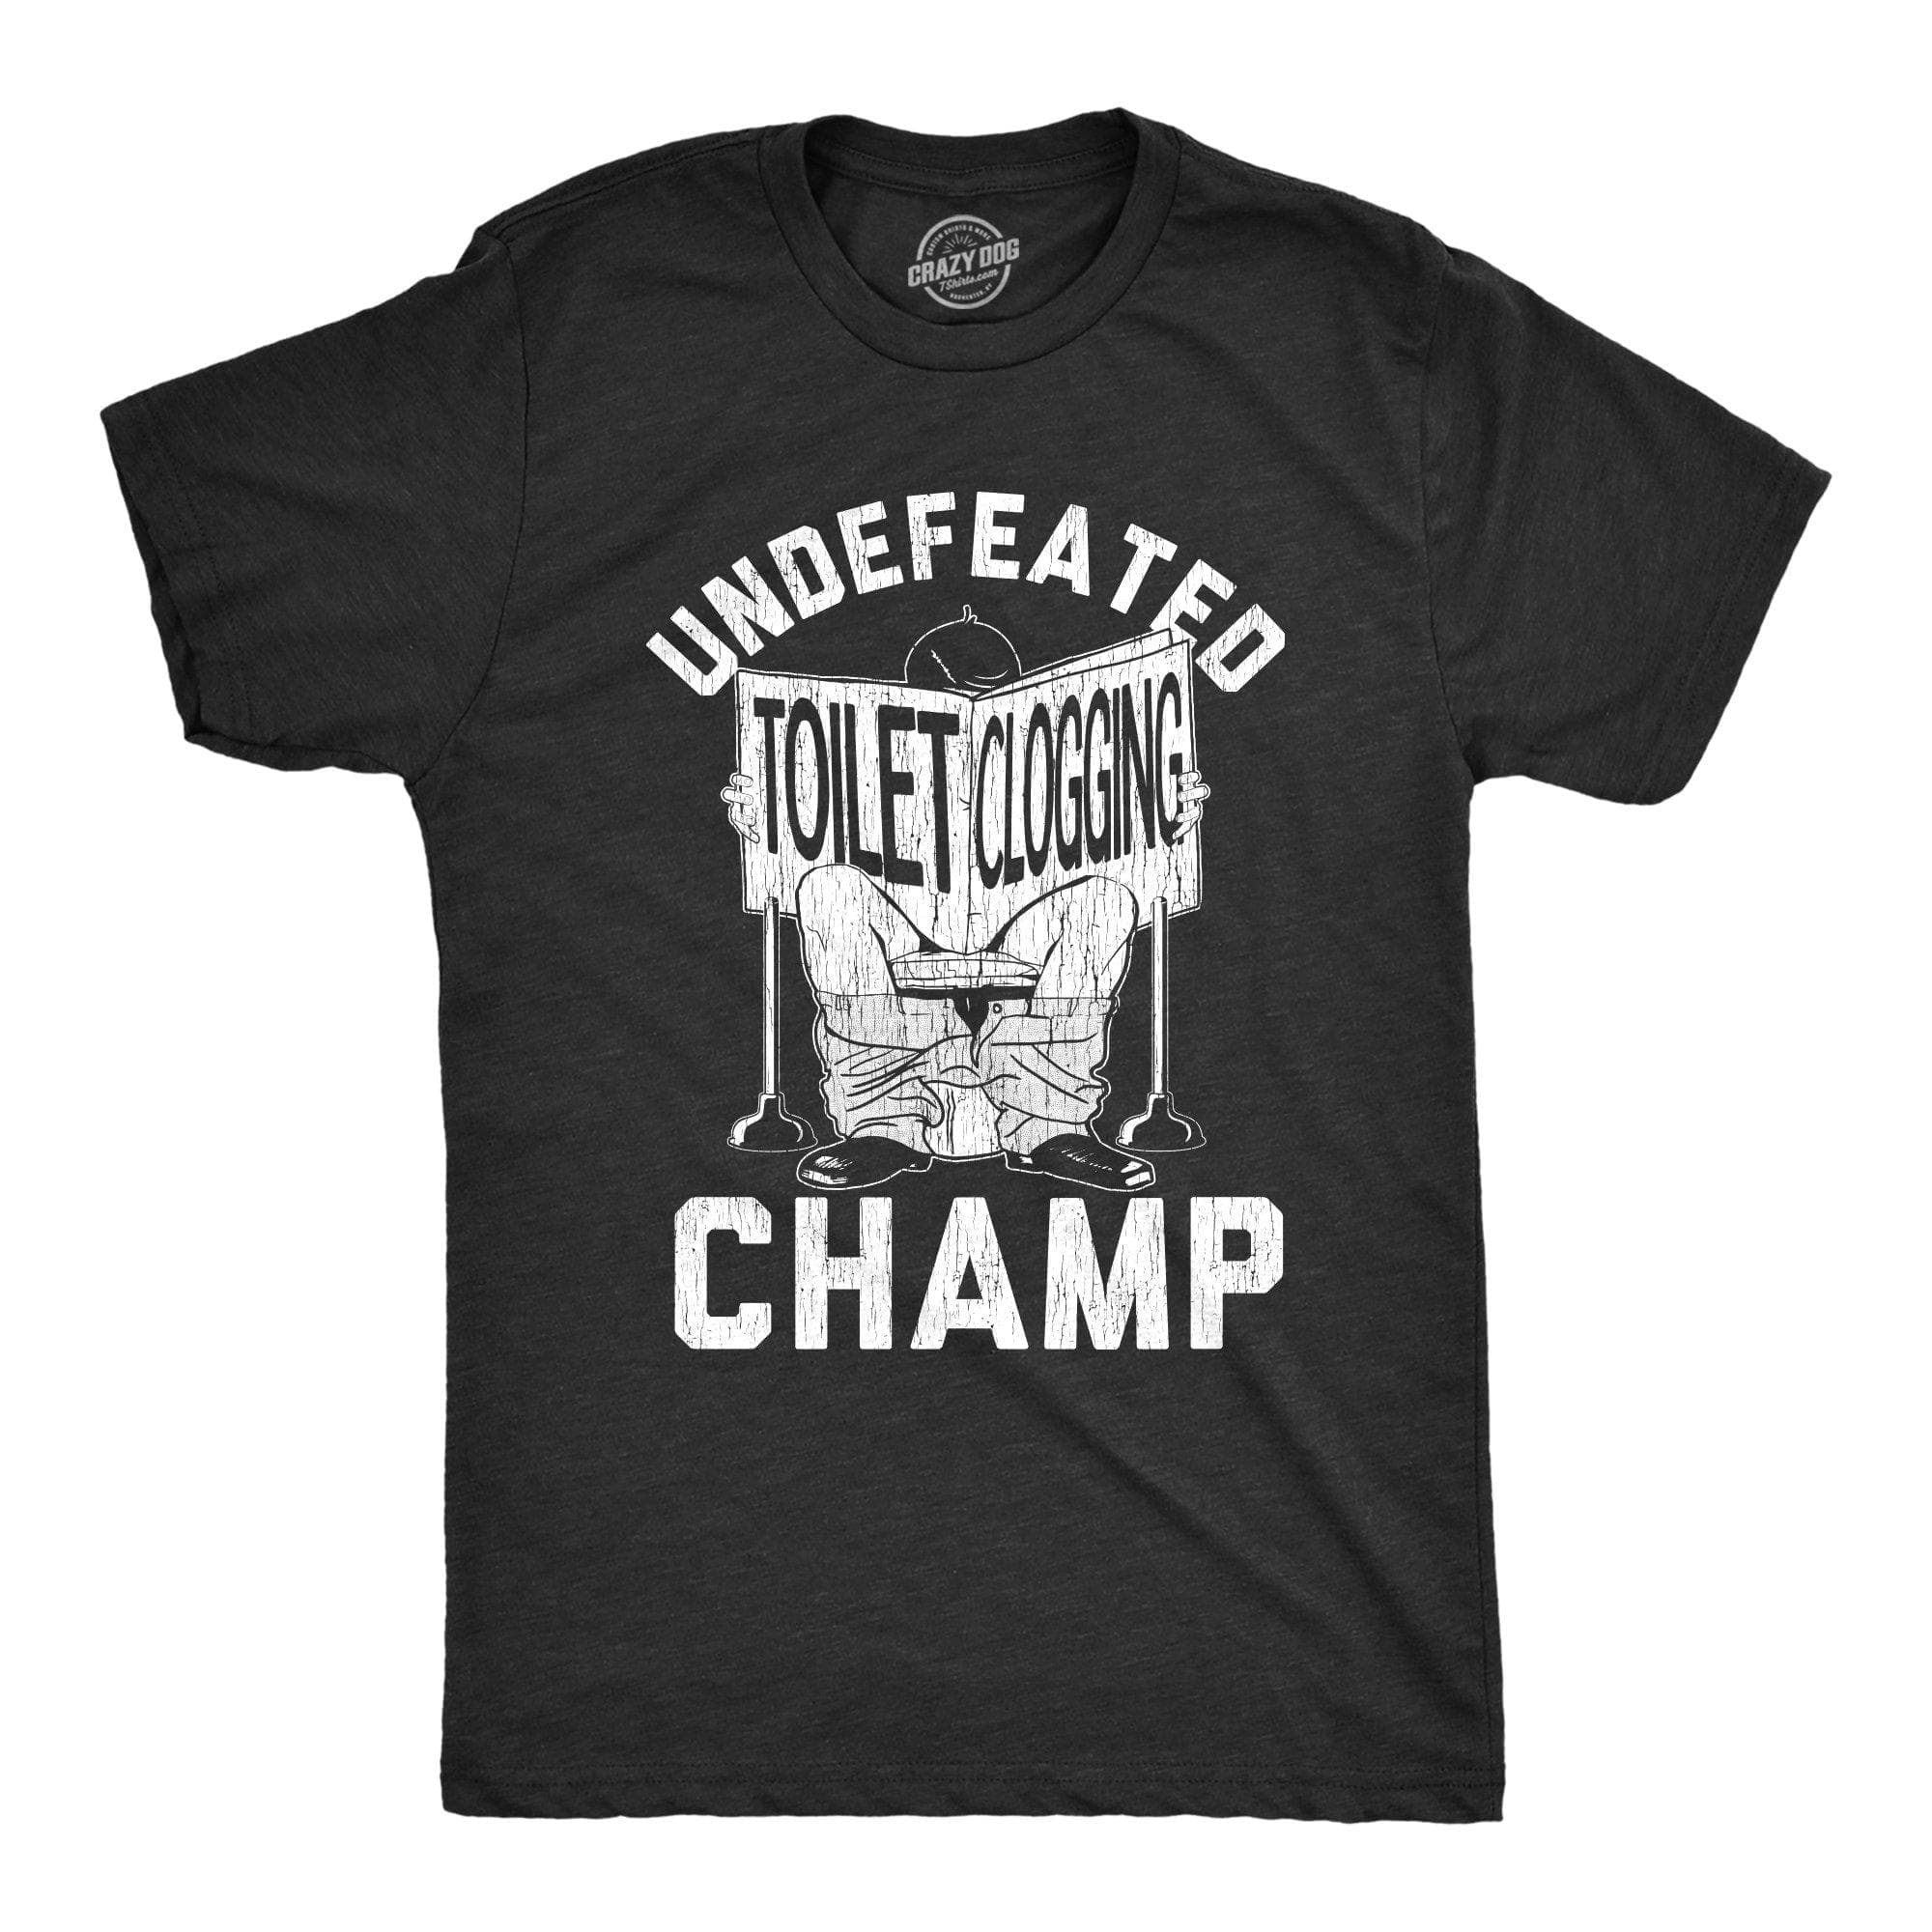 Undefeated Toilet Clogging Champ Men's Tshirt - Crazy Dog T-Shirts